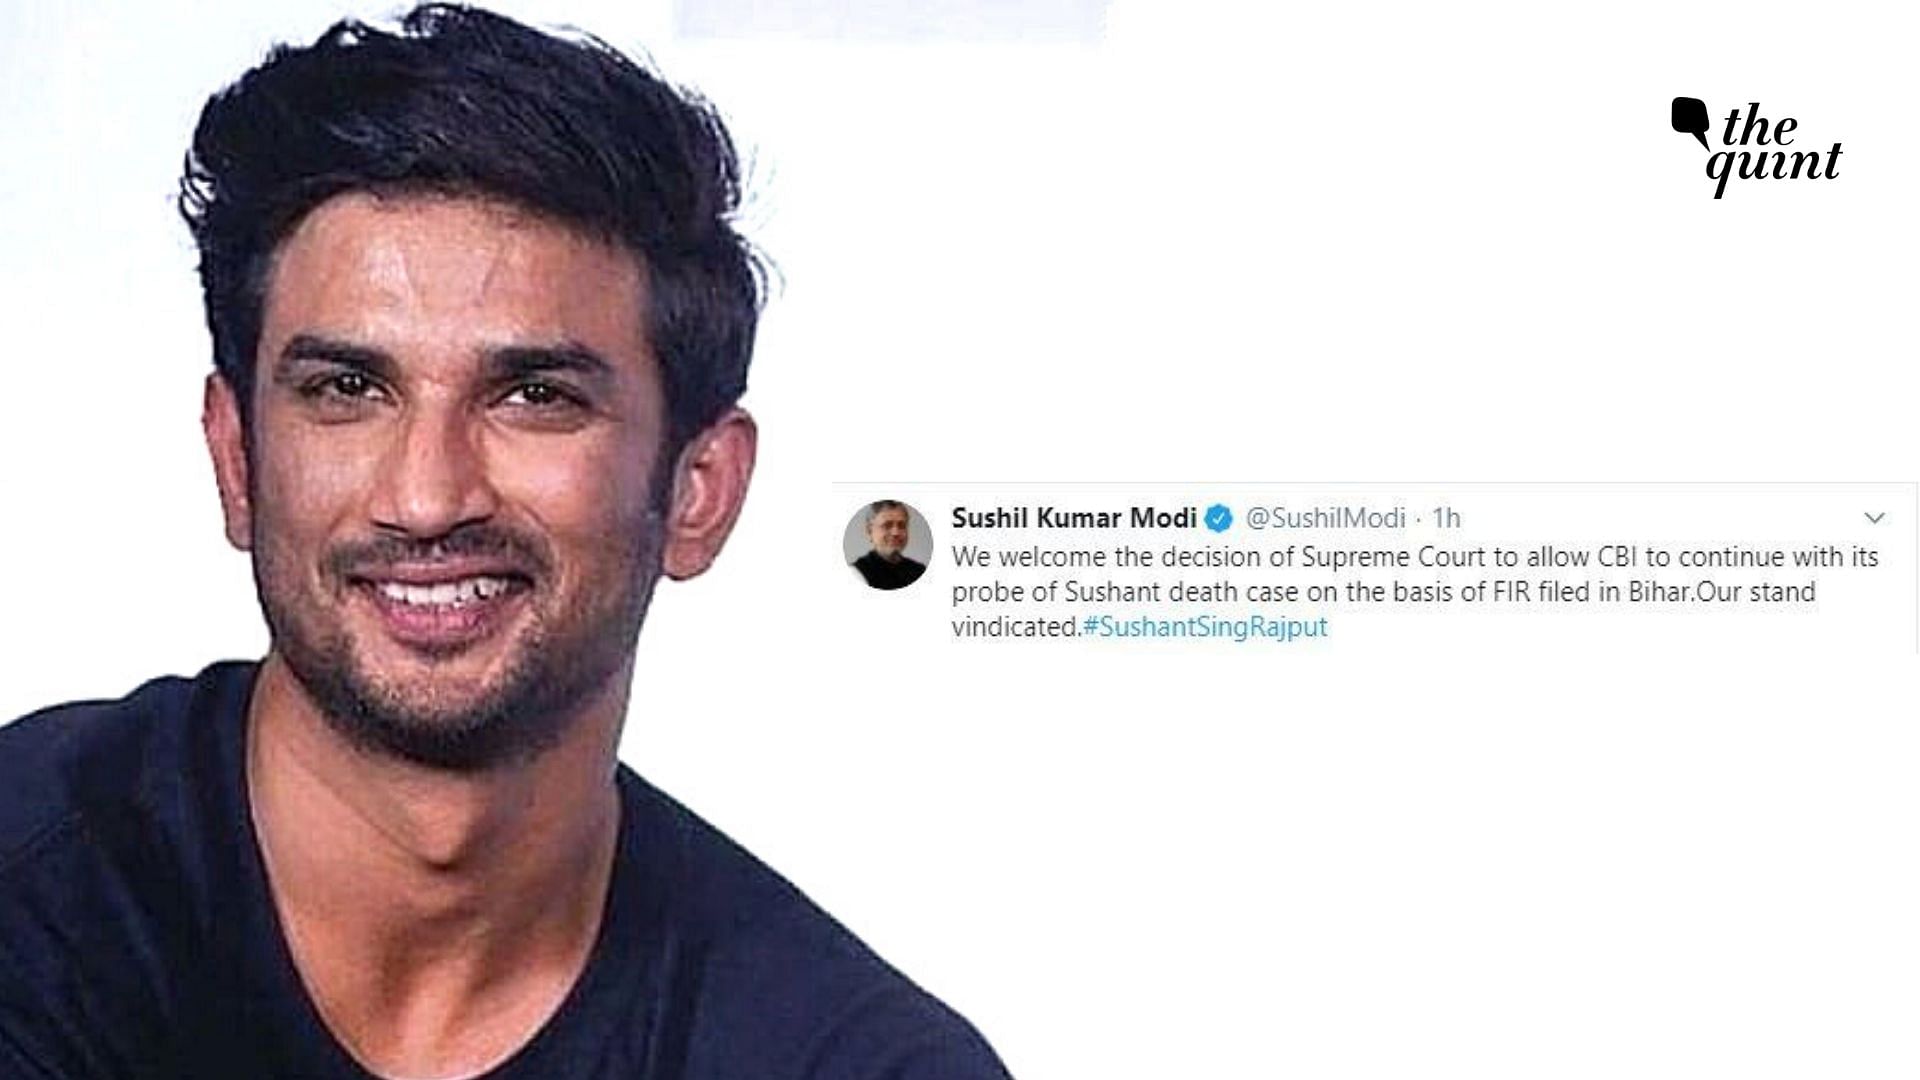 Several political leaders on Wednesday, 19 August hailed the<a href="https://www.thequint.com/entertainment/bollywood/sushant-singh-rajput-case-supreme-court-judgment-on-rhea-chakraborty-petition"> Supreme Cort verdict that orderd a probe</a> by the Central Bureau of Investigation (CBI) onto the death of actor Sushant Singh Rajput.